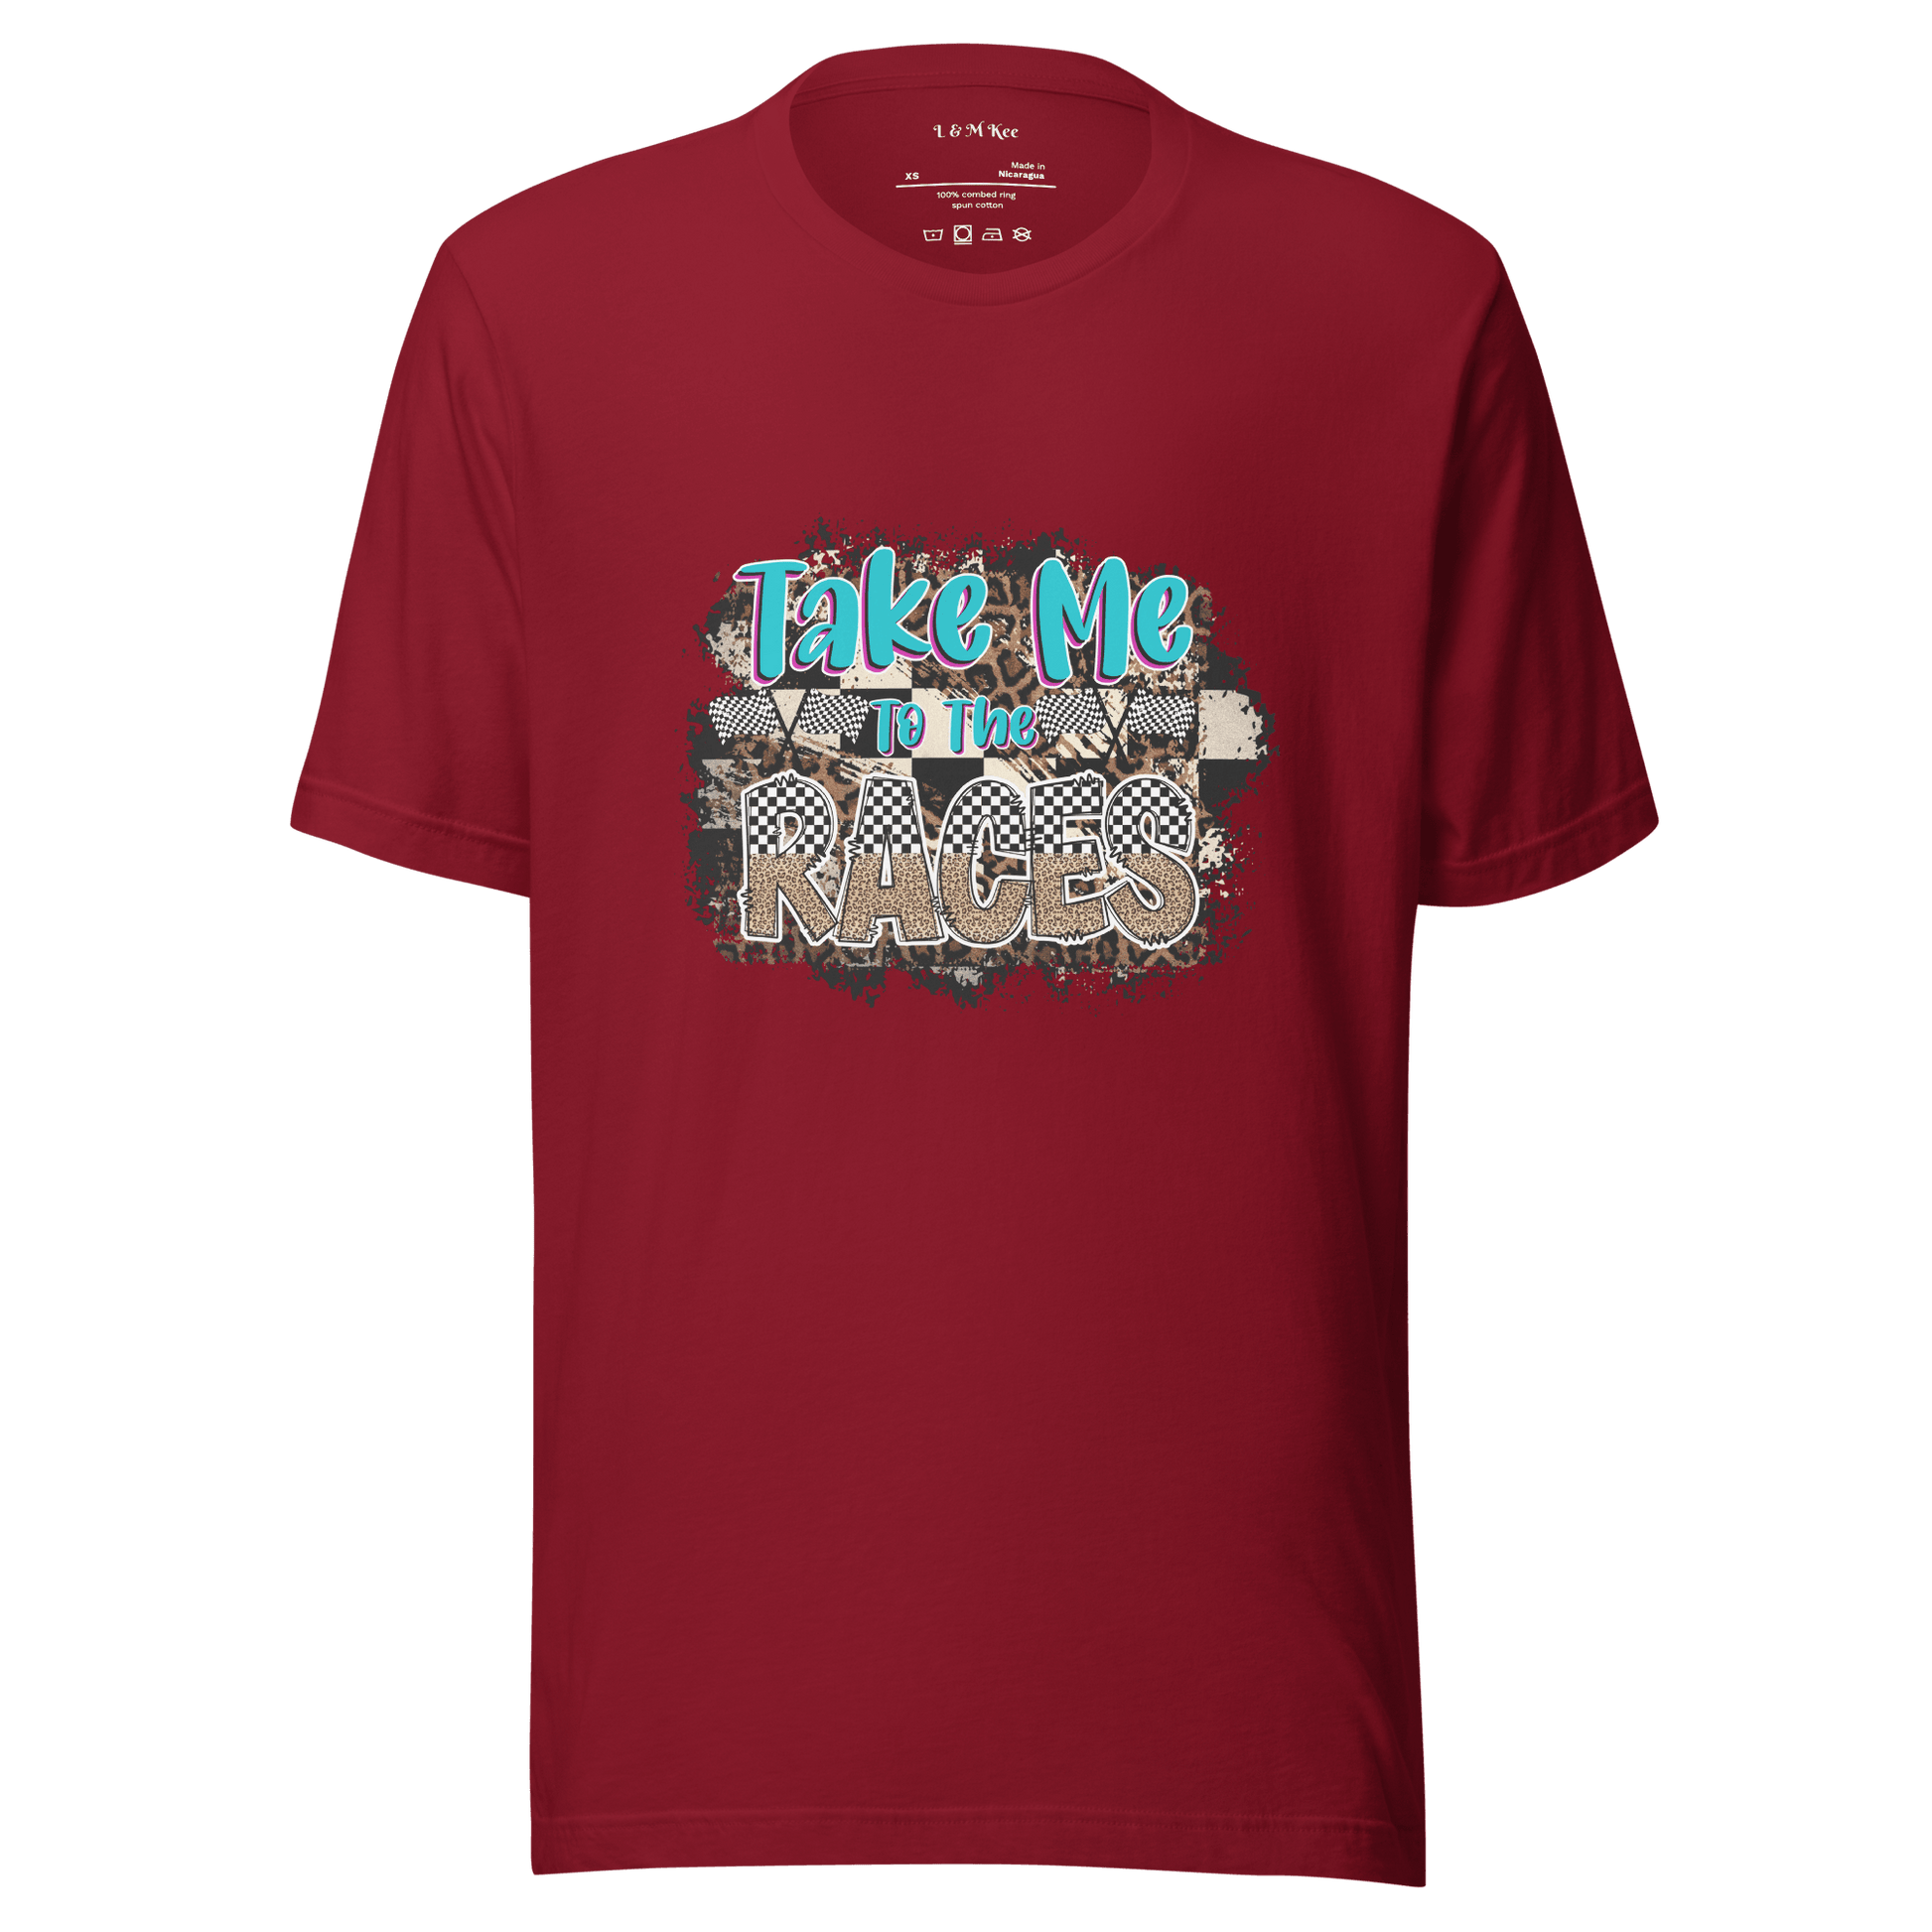 Take Me To the Races Unisex T-shirt - L & M Kee, LLC